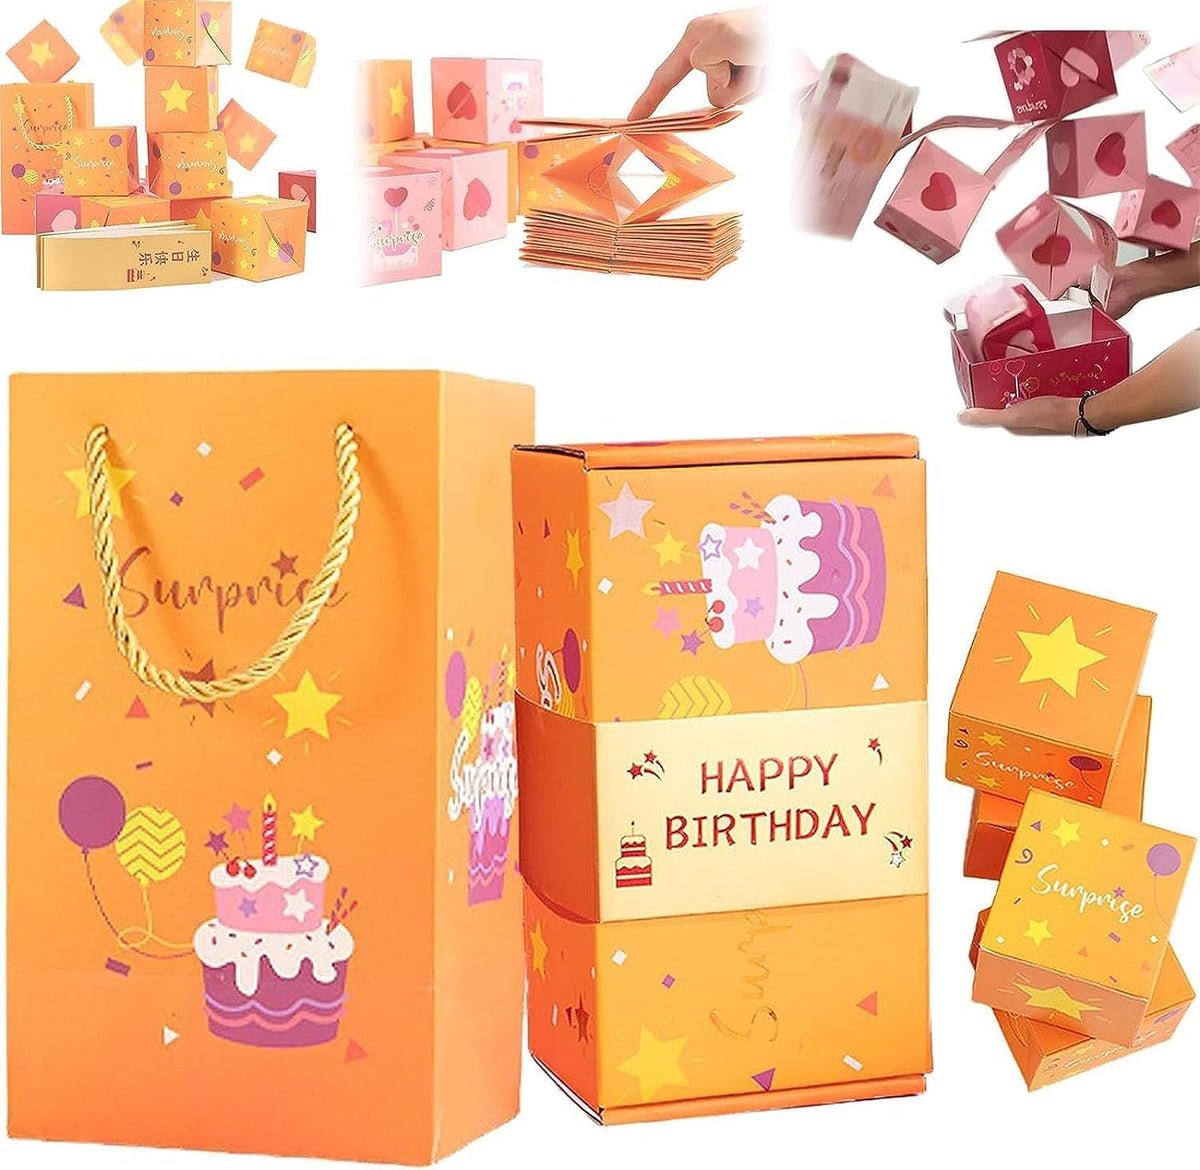 Surprise Gift Box, Folding Bounce Surprise Gift Box, Creative Surprise Exploding Box, Boxes Explosion, Creating The Most Surprising Gift for Birthday Anniversary Valentine Day Gifts